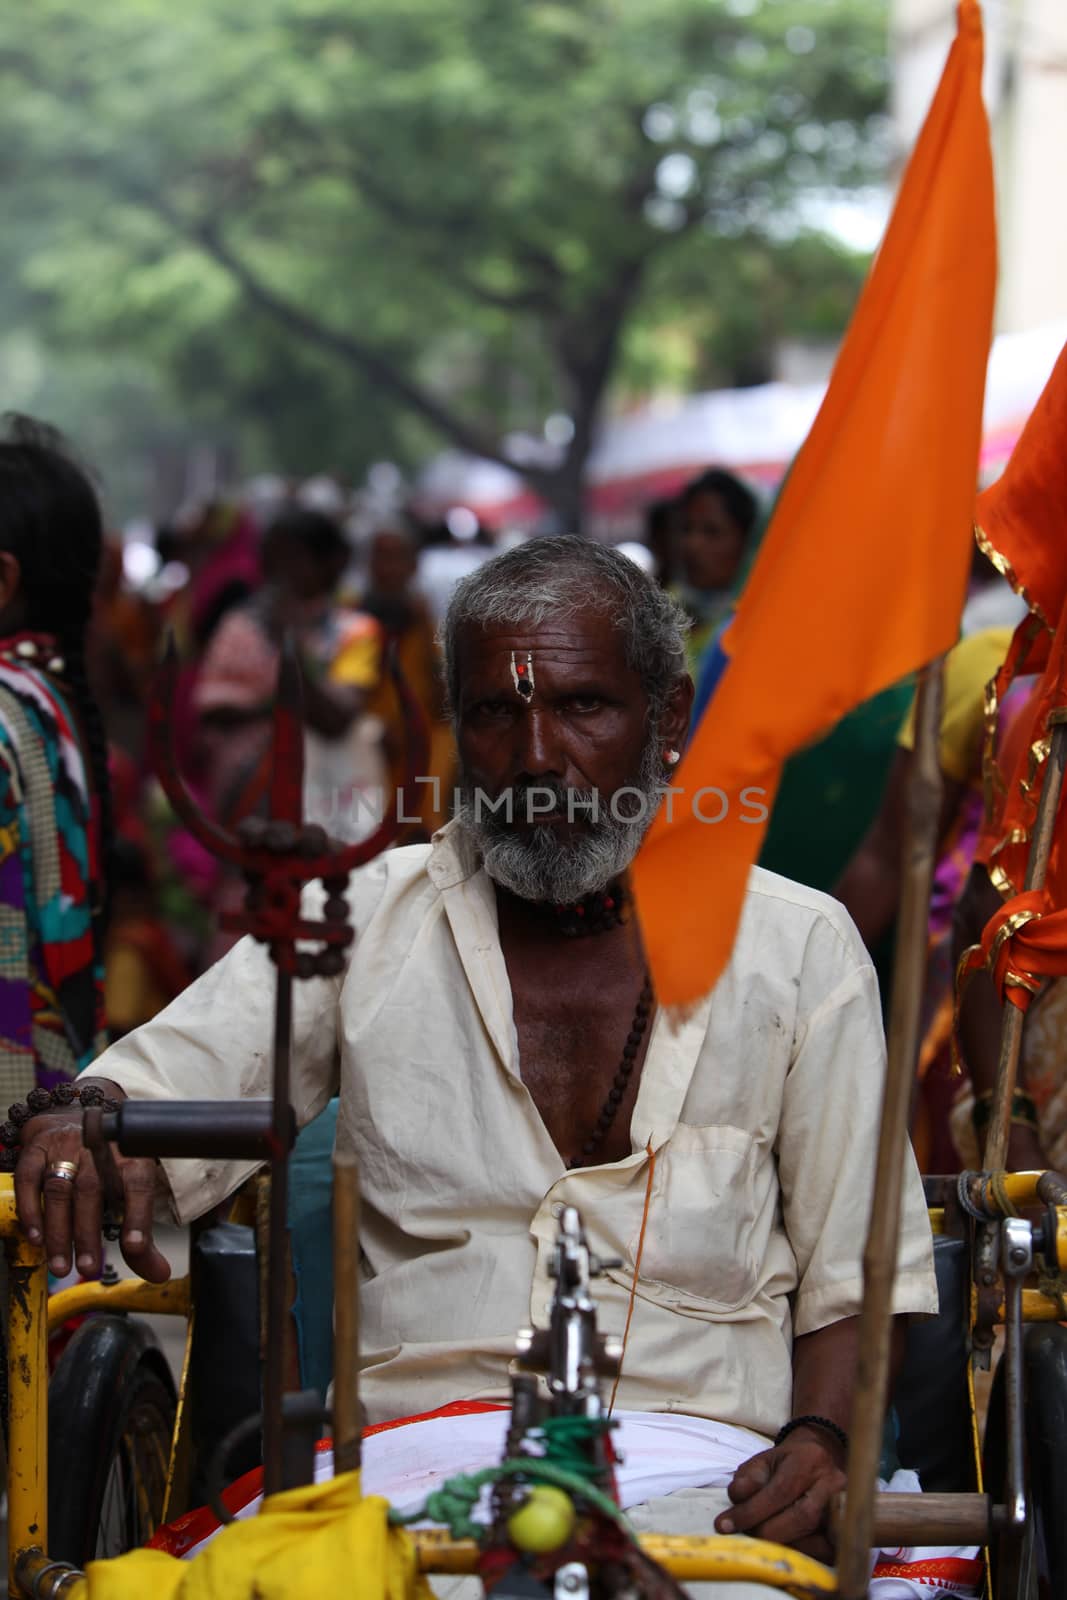 Pune, India  - ‎July 11, ‎2015: An old Indian pilgrim in a traditional attire during a religious wari pilgrimmage festival in India